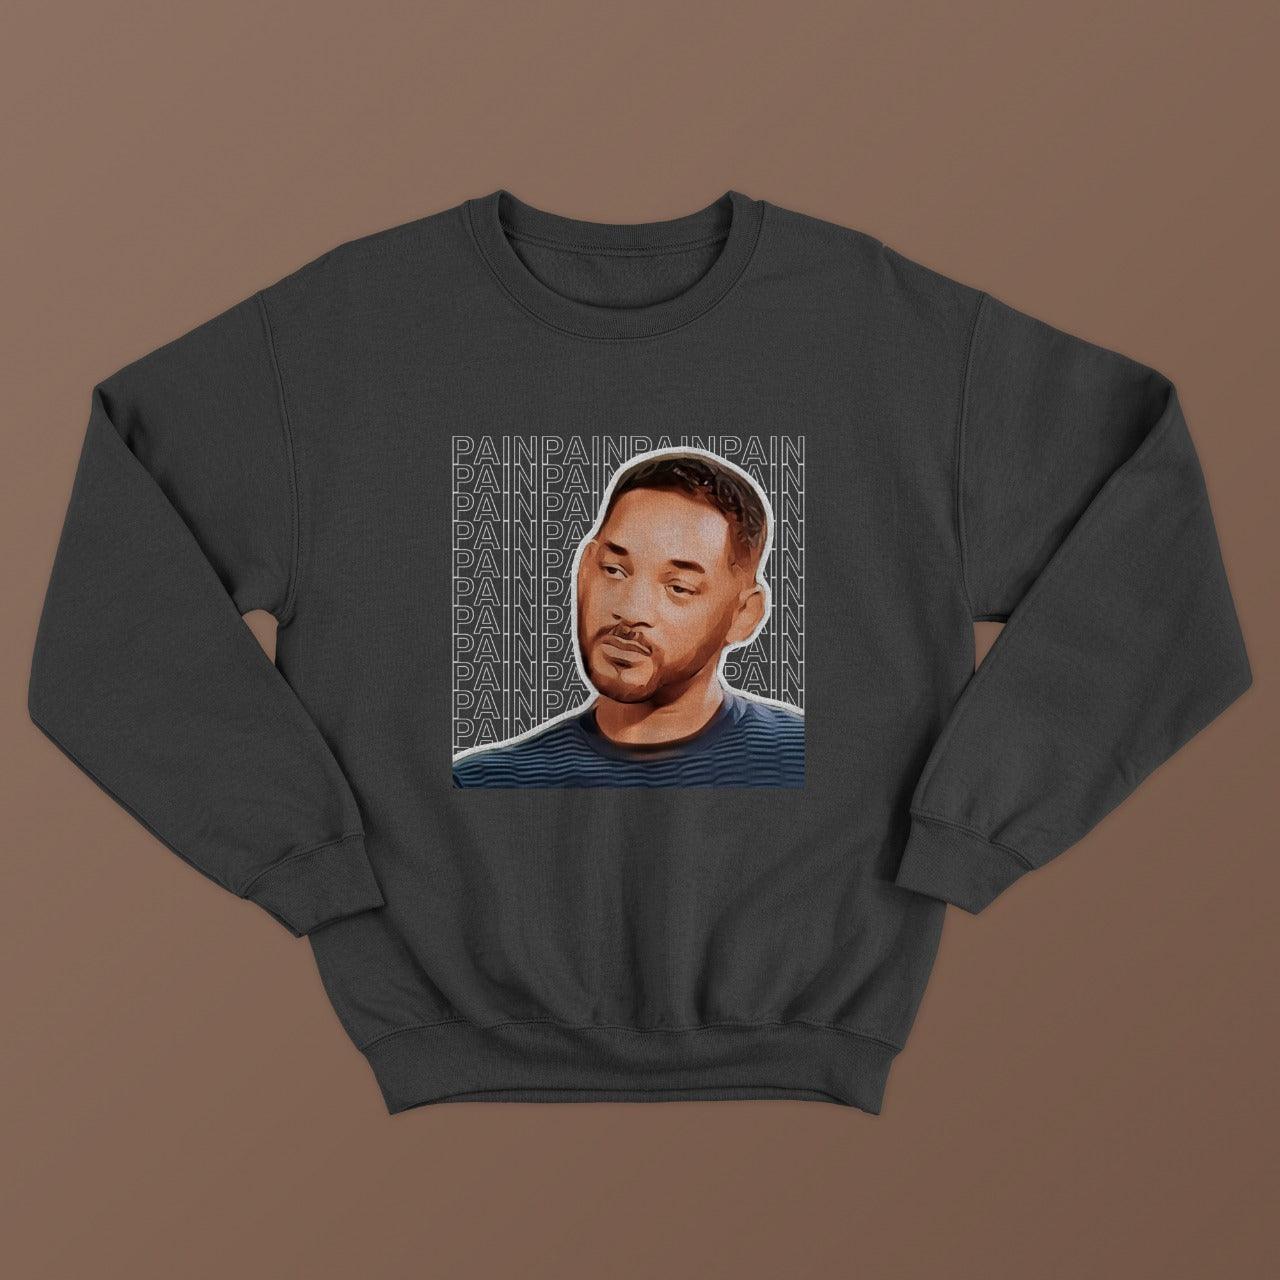 dark grey sweatshirt with picture of sad will smith printed on it with pain written multiple times in the background, relatable memes